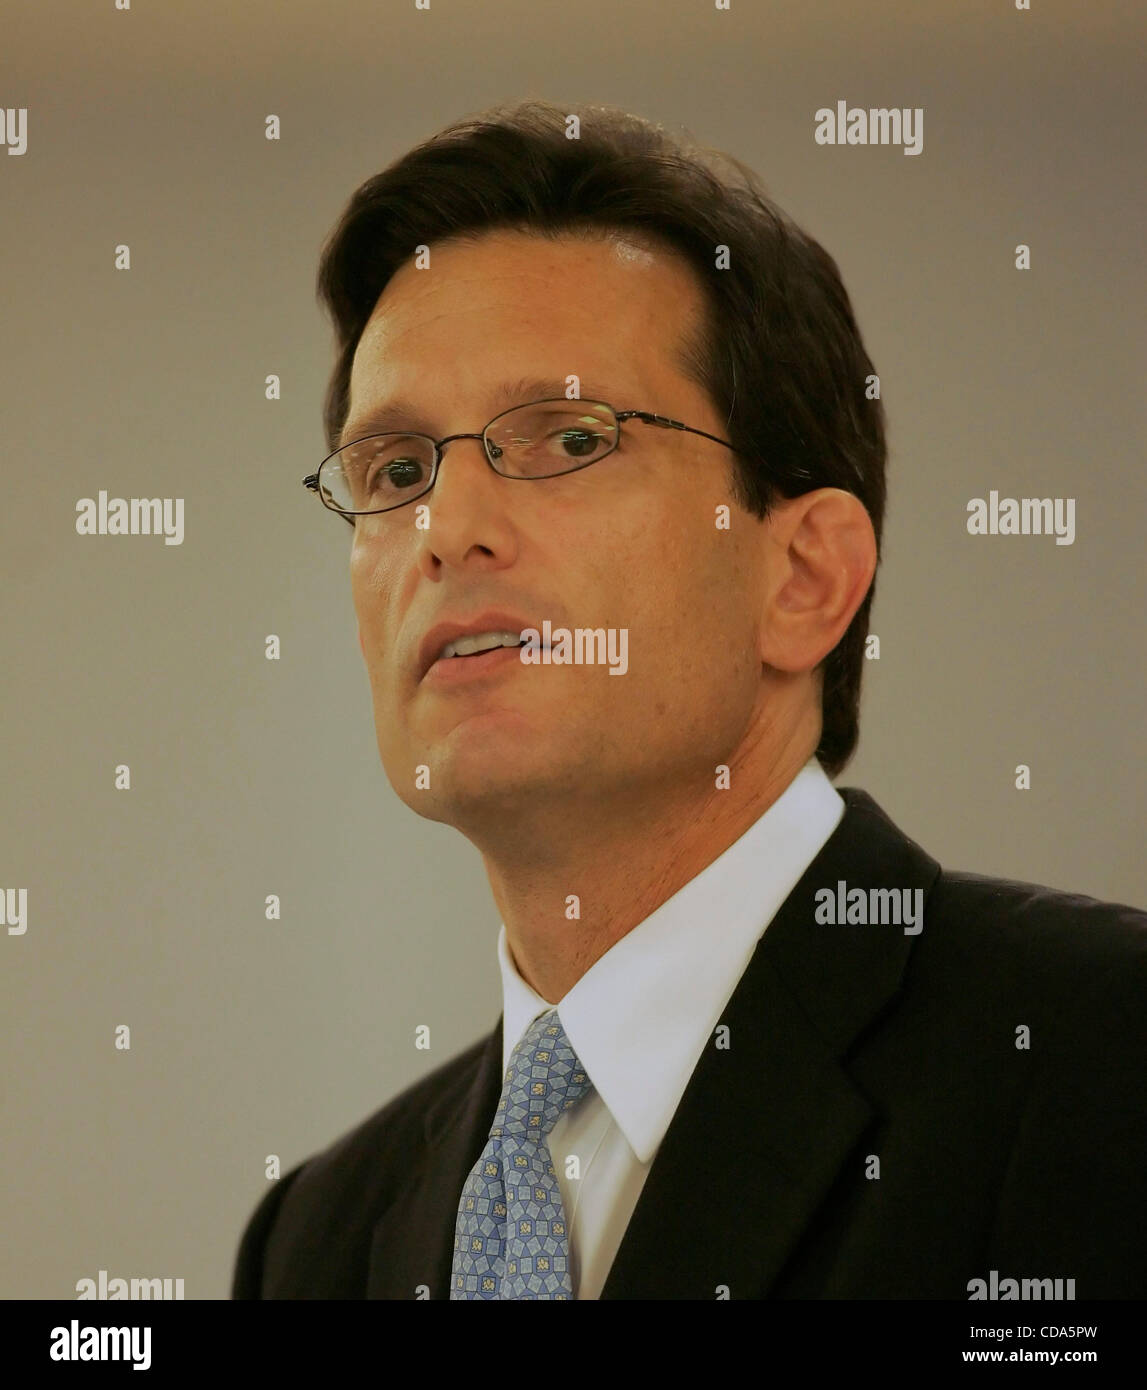 Virginia Representative ERIC CANTOR speaks during the annual Graves County Republican Party Fancy Farm Picnic Breakfast at the Graves County High School cafeteria. The 7th District Virginia congressman currently serves as House minority whip. Stock Photo